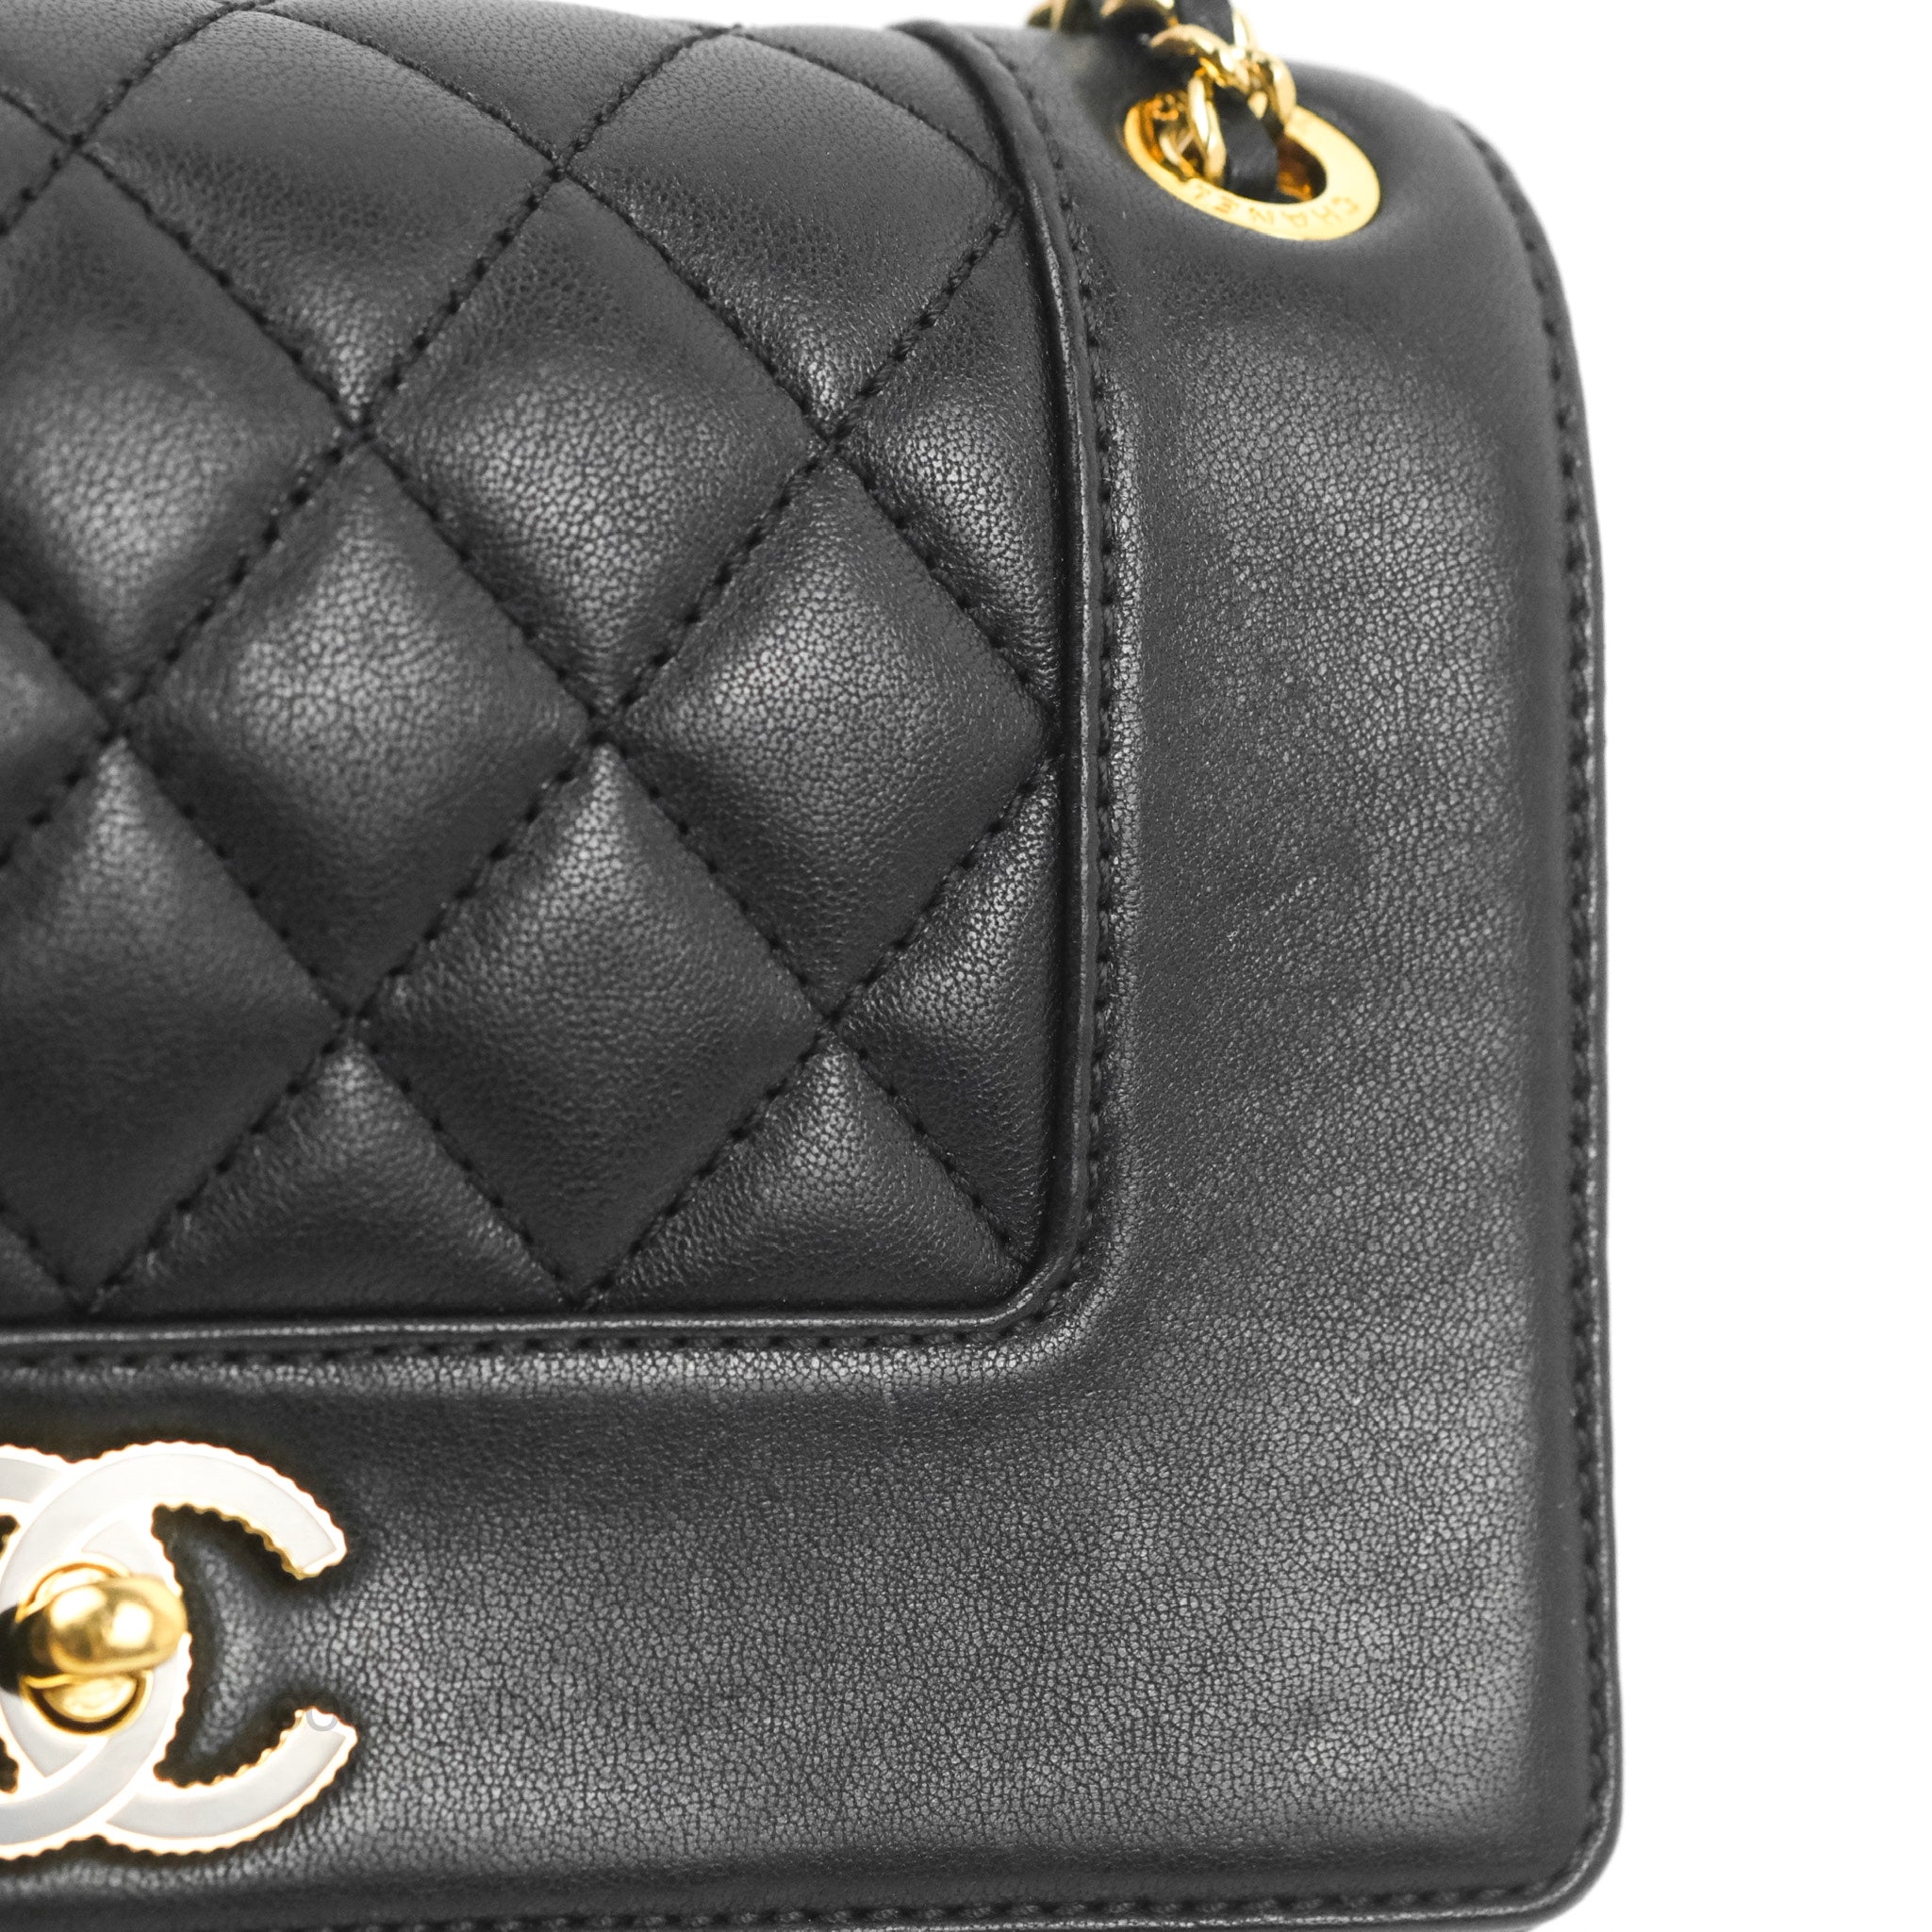 Chanel Small Vintage Mademoiselle Flap Black Sheepskin Gold Hardware – Coco  Approved Studio